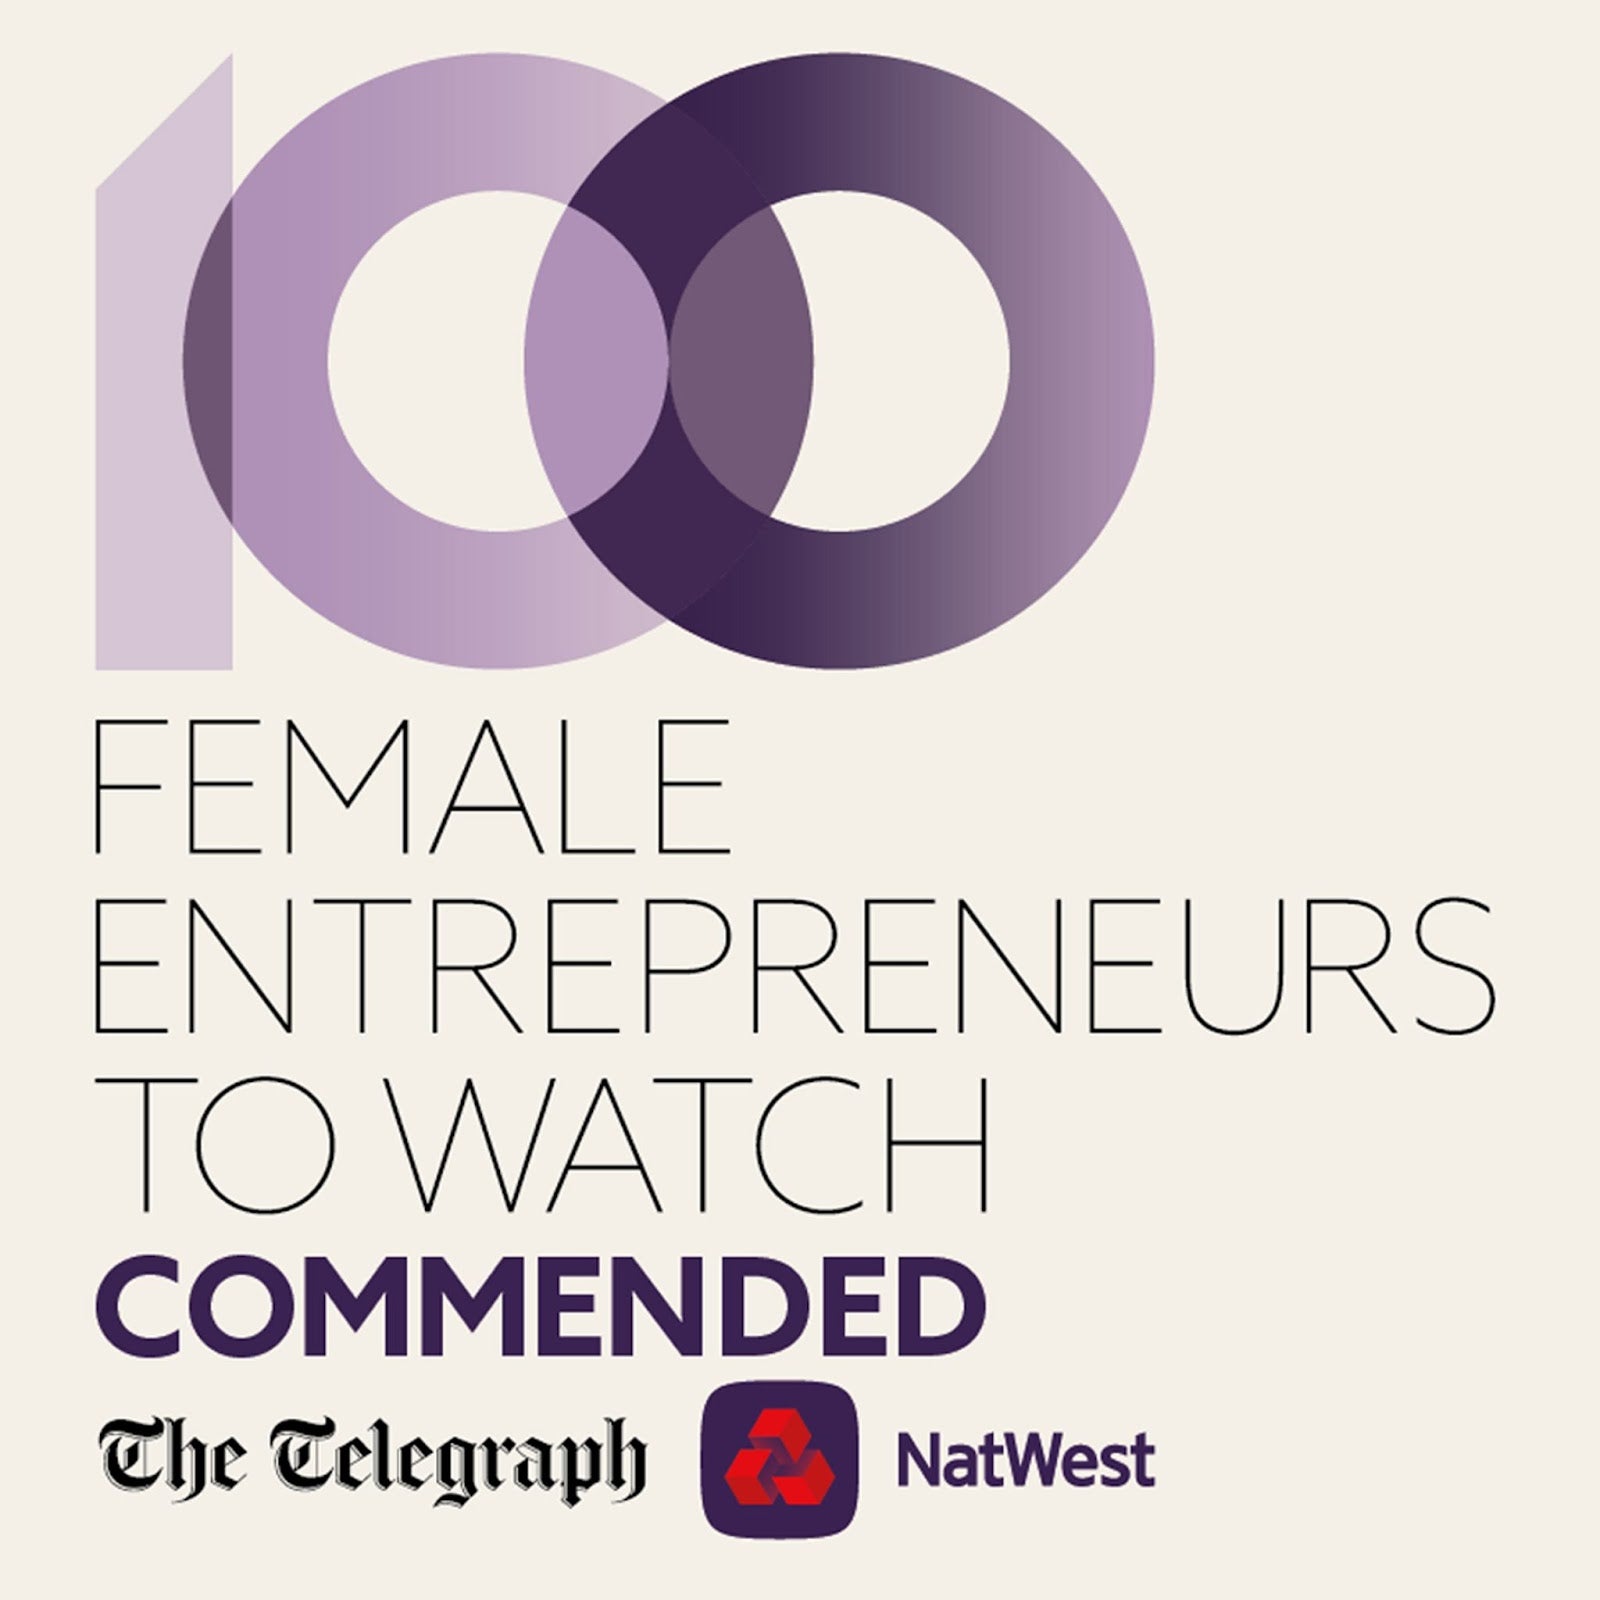 100 Female Entrepreneurs To Watch (Commended) award